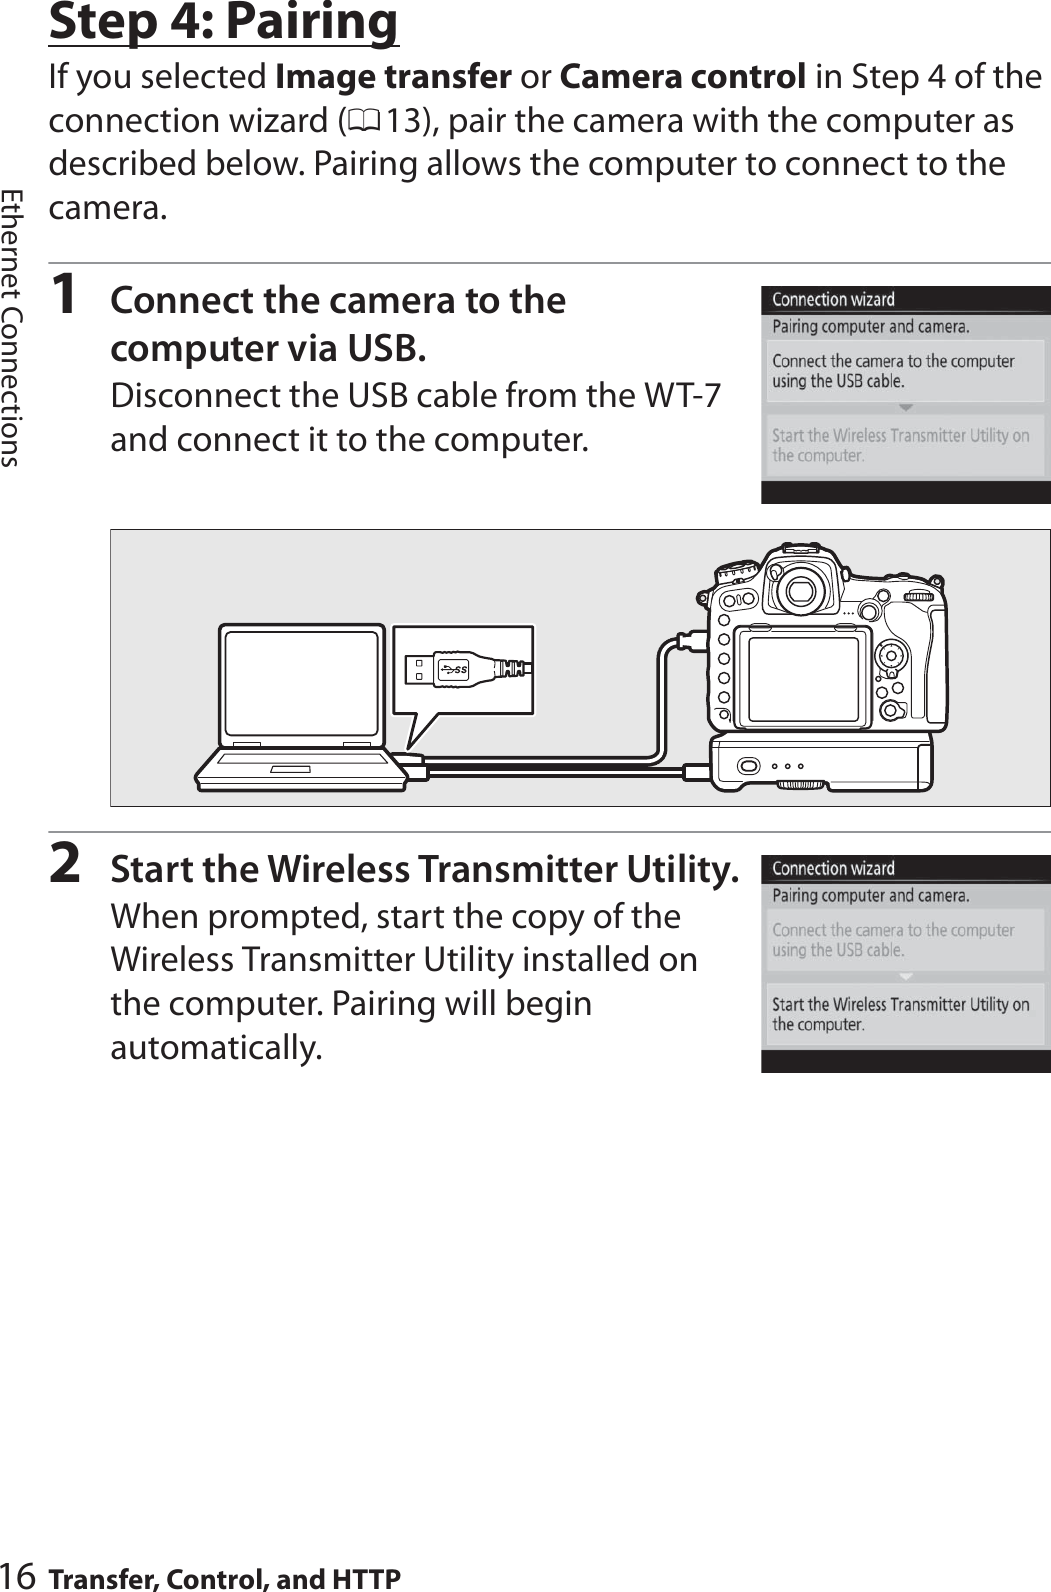 16 Transfer, Control, and HTTPEthernet ConnectionsStep 4: PairingIf you selected Image transfer or Camera control in Step 4 of the connection wizard (013), pair the camera with the computer as described below. Pairing allows the computer to connect to the camera.1Connect the camera to the computer via USB.Disconnect the USB cable from the WT-7 and connect it to the computer.2Start the Wireless Transmitter Utility.When prompted, start the copy of the Wireless Transmitter Utility installed on the computer. Pairing will begin automatically.